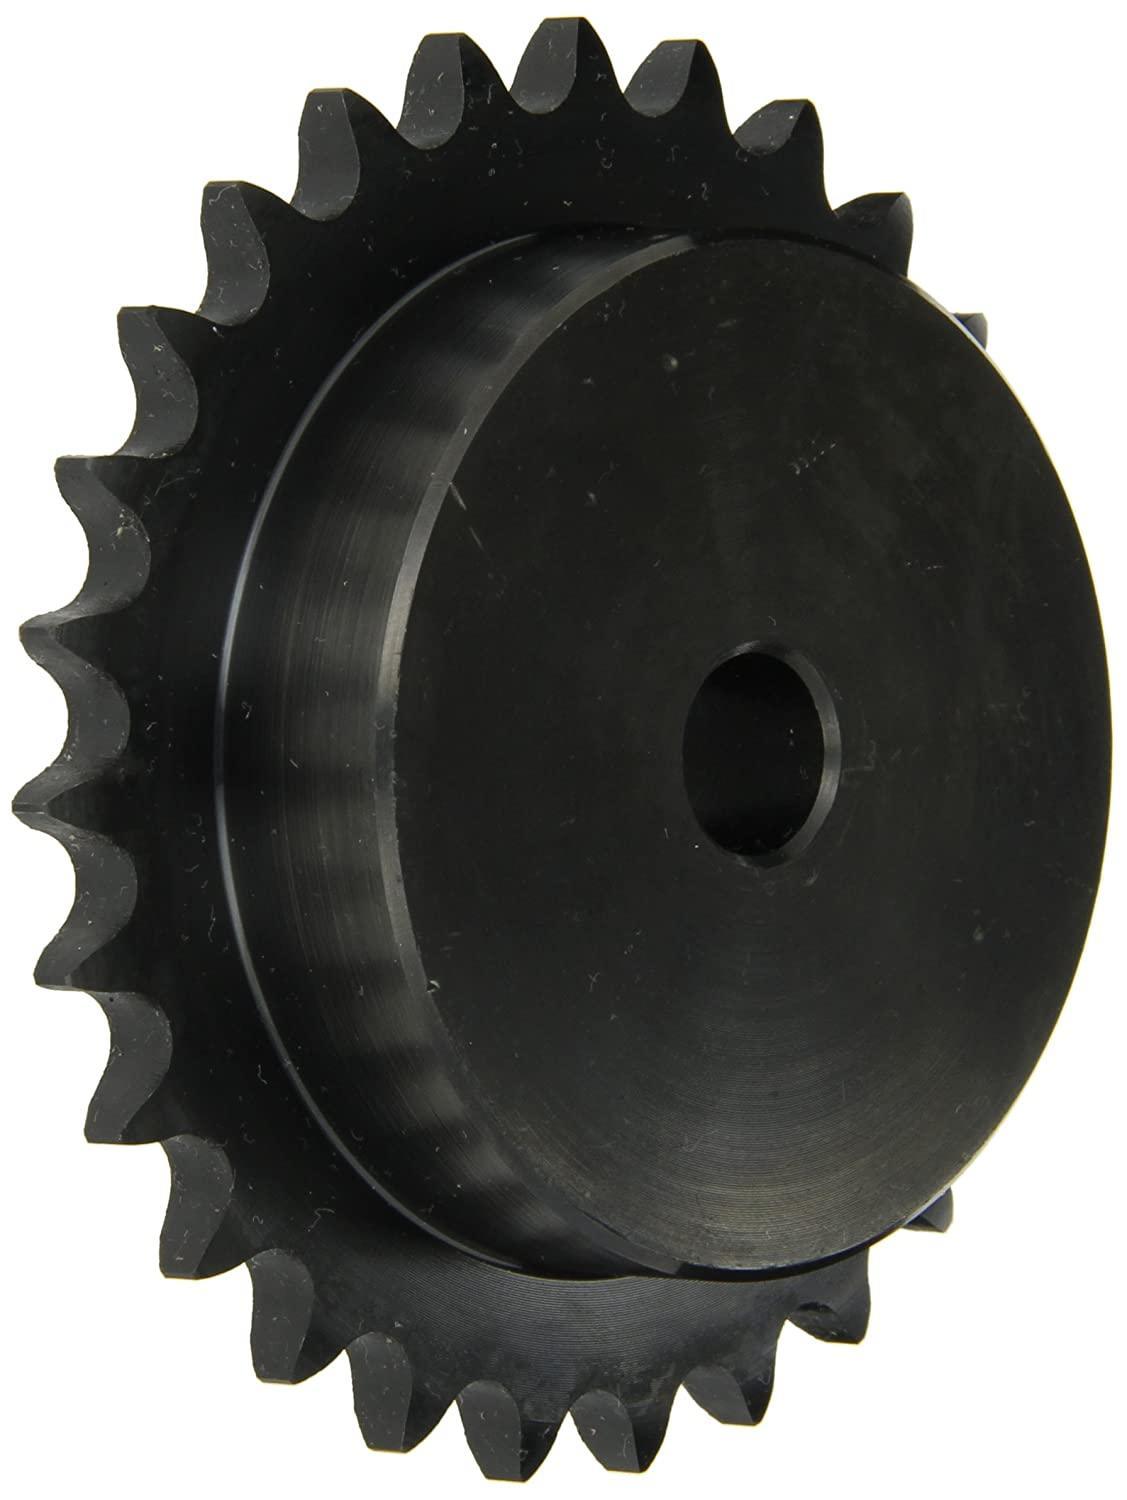 100B36 Roller Chain Sprocket With Stock Bore - Forces Inc